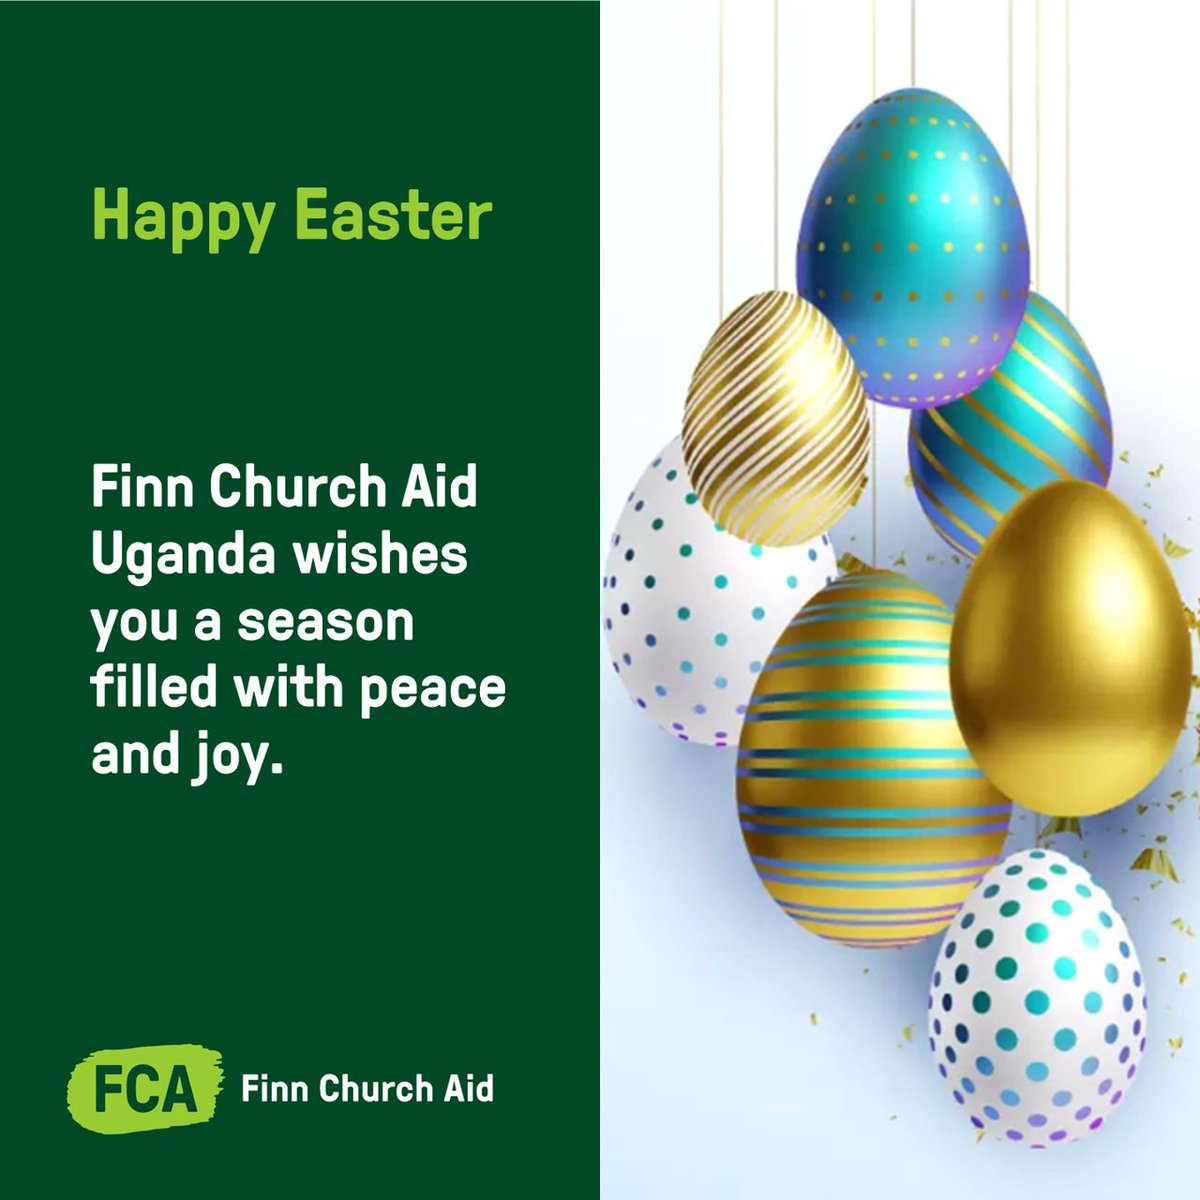 May this Easter fill your hearts with love, peace, and joy. Together, let's spread kindness and compassion. Happy Easter!